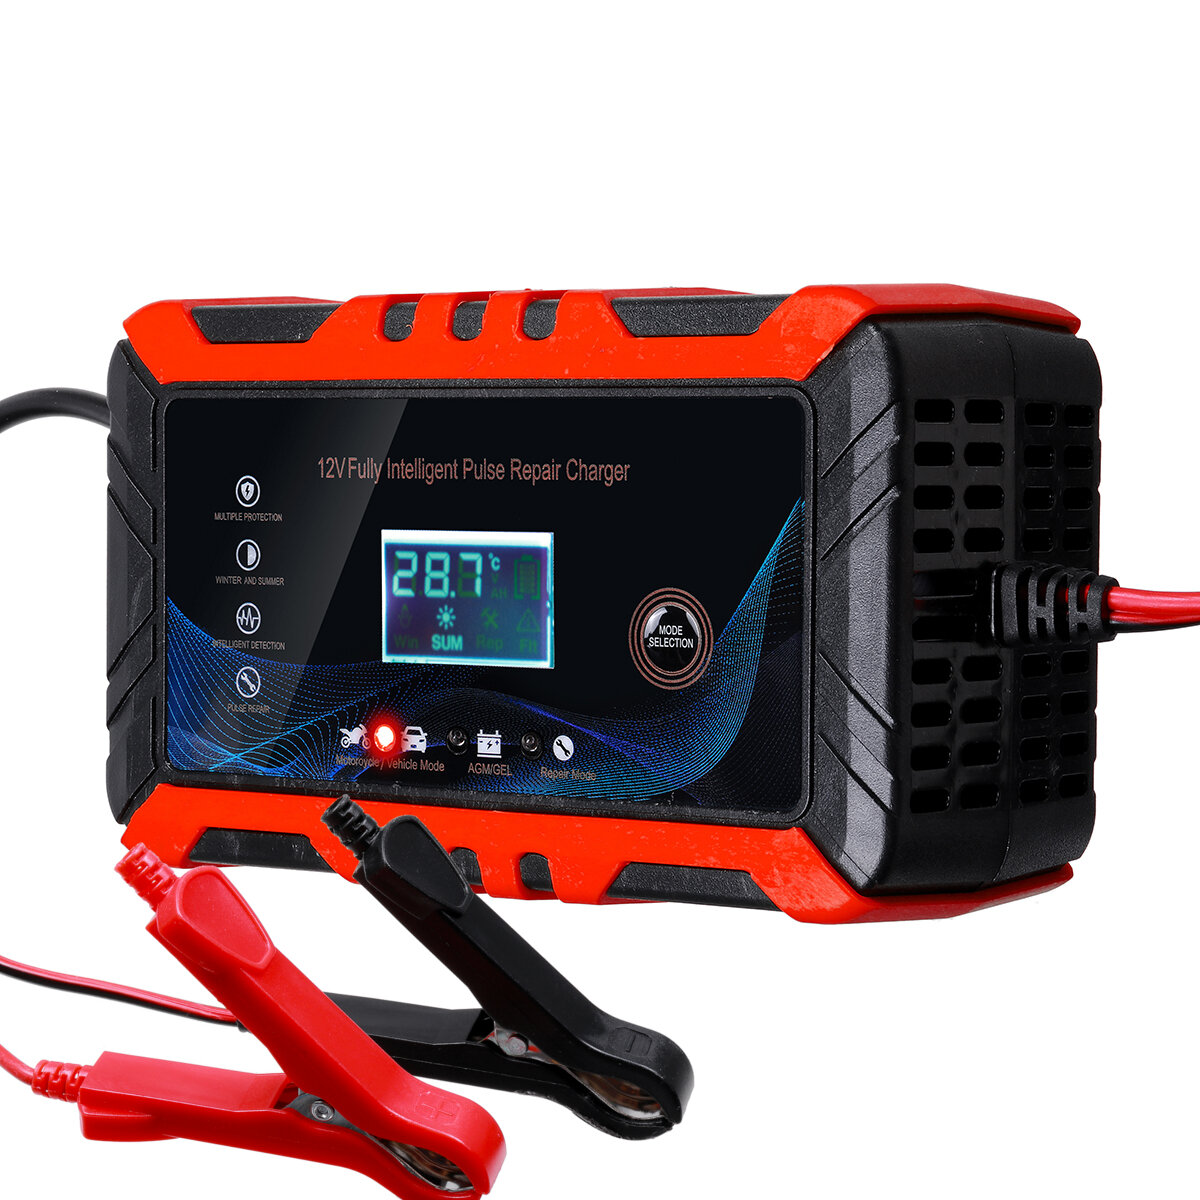 Image of 12V 6A Pulse Repair Battery Charger LCD Display Accumulator Charging AGM/GEL Lead-acid Batteries Charging Touch Screen C